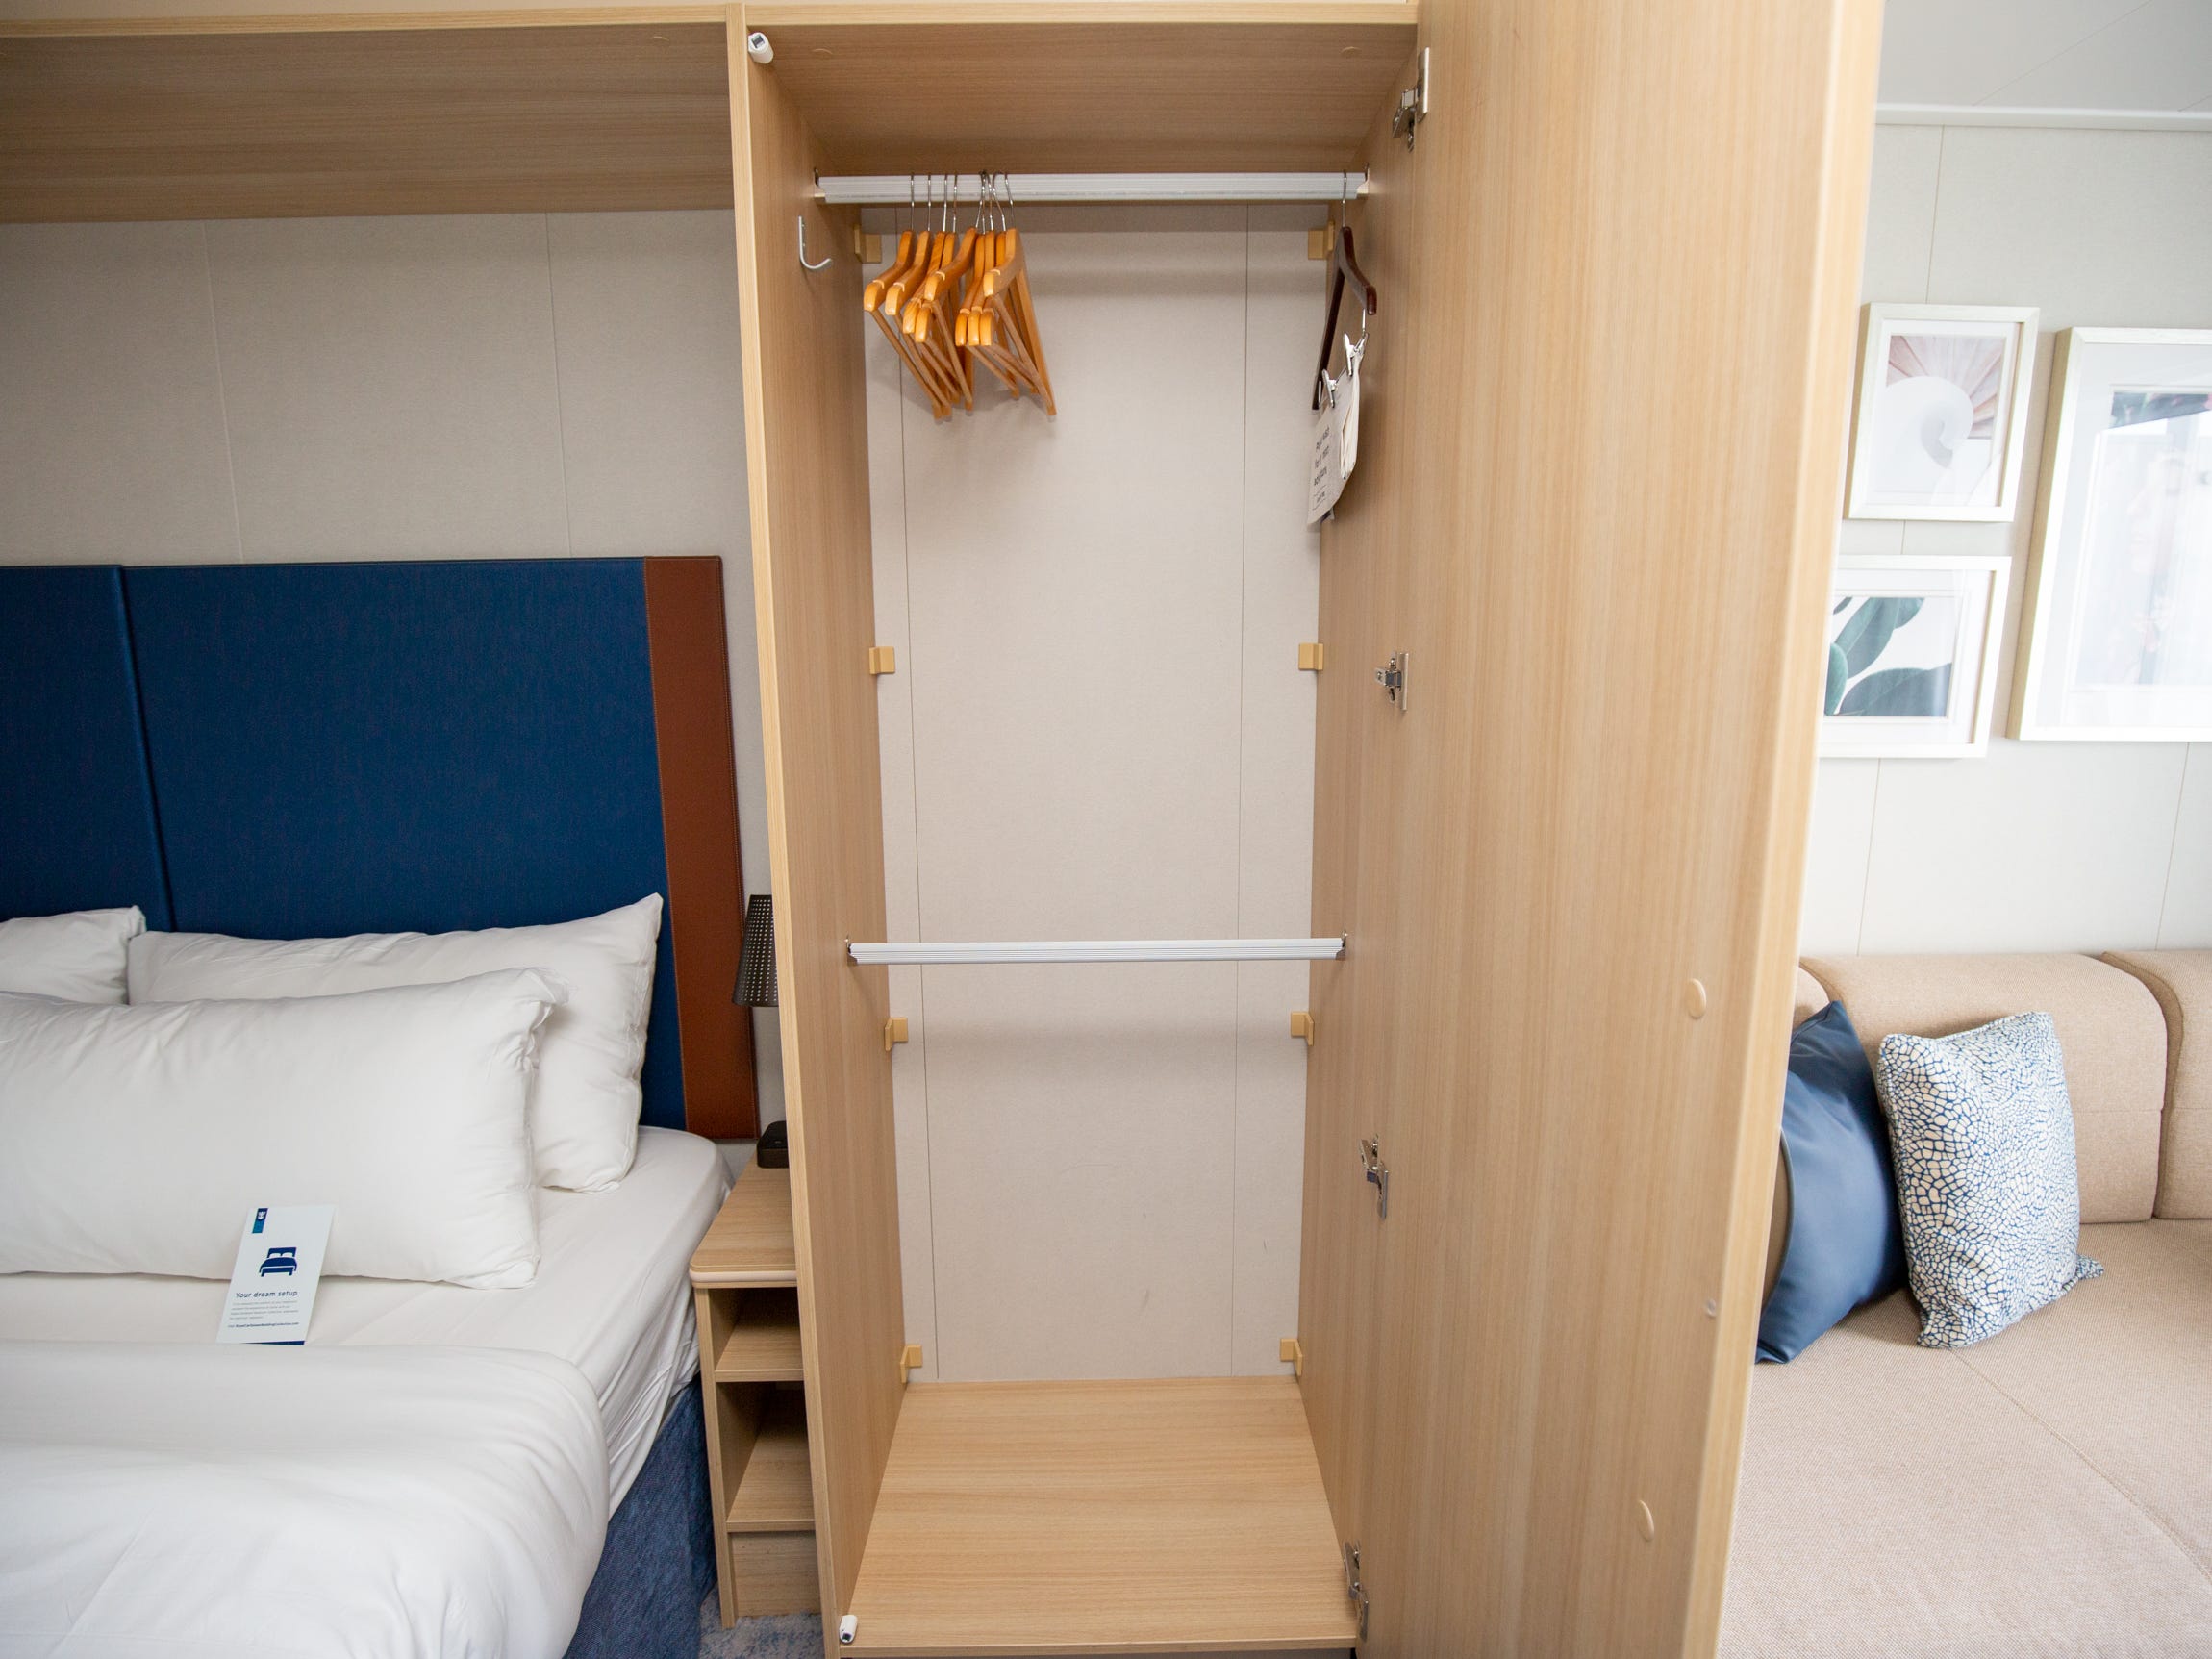 <p>My balcony cabin on Wonder looked less modern than its successor (the TV on Icon had Chromecast, after all).</p><p>But it was significantly more functional and comfortable. The bed was incomparably more pleasant, the closets had more defined storage components, and the bathroom was considerably larger, even if it lacked additional shelving and drawers.</p>